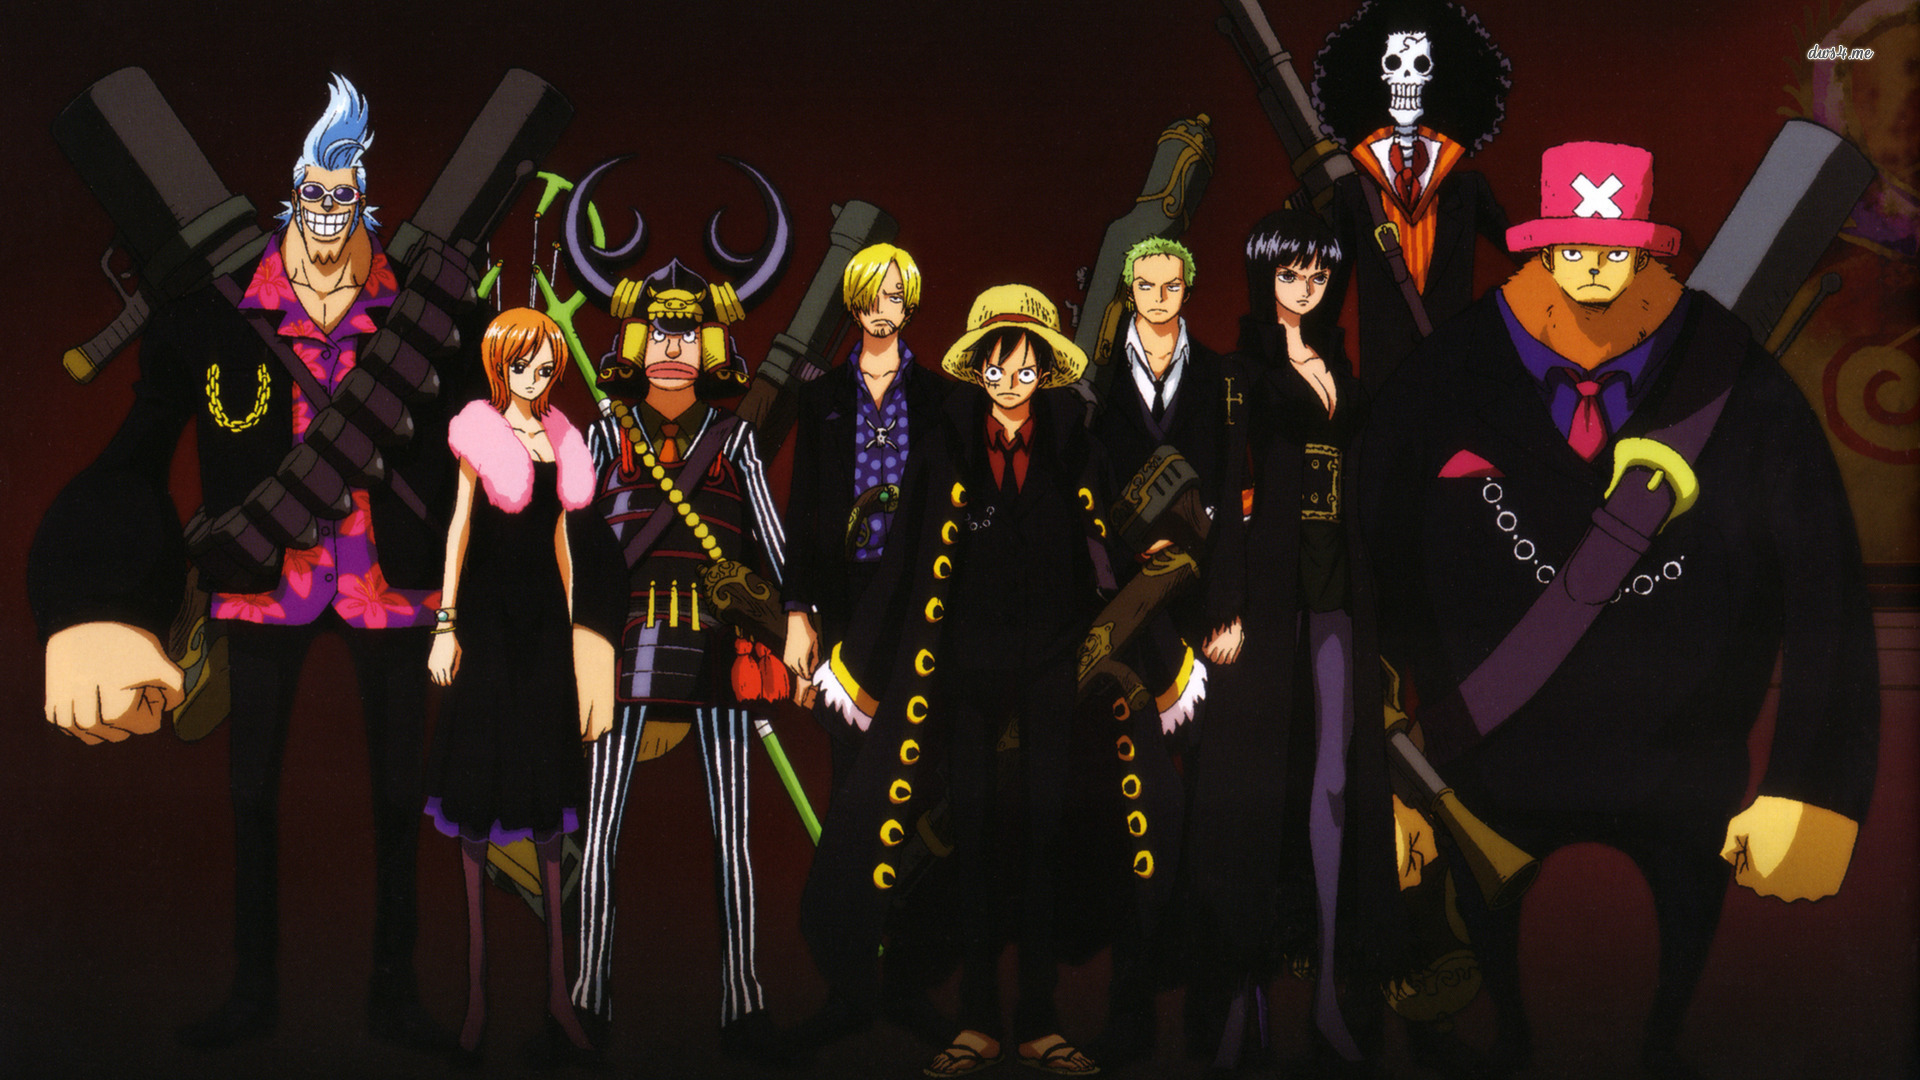 One Piece Wallpaper Free Download - Straw Hat Pirates Strong World -  1920x1080 Wallpaper 